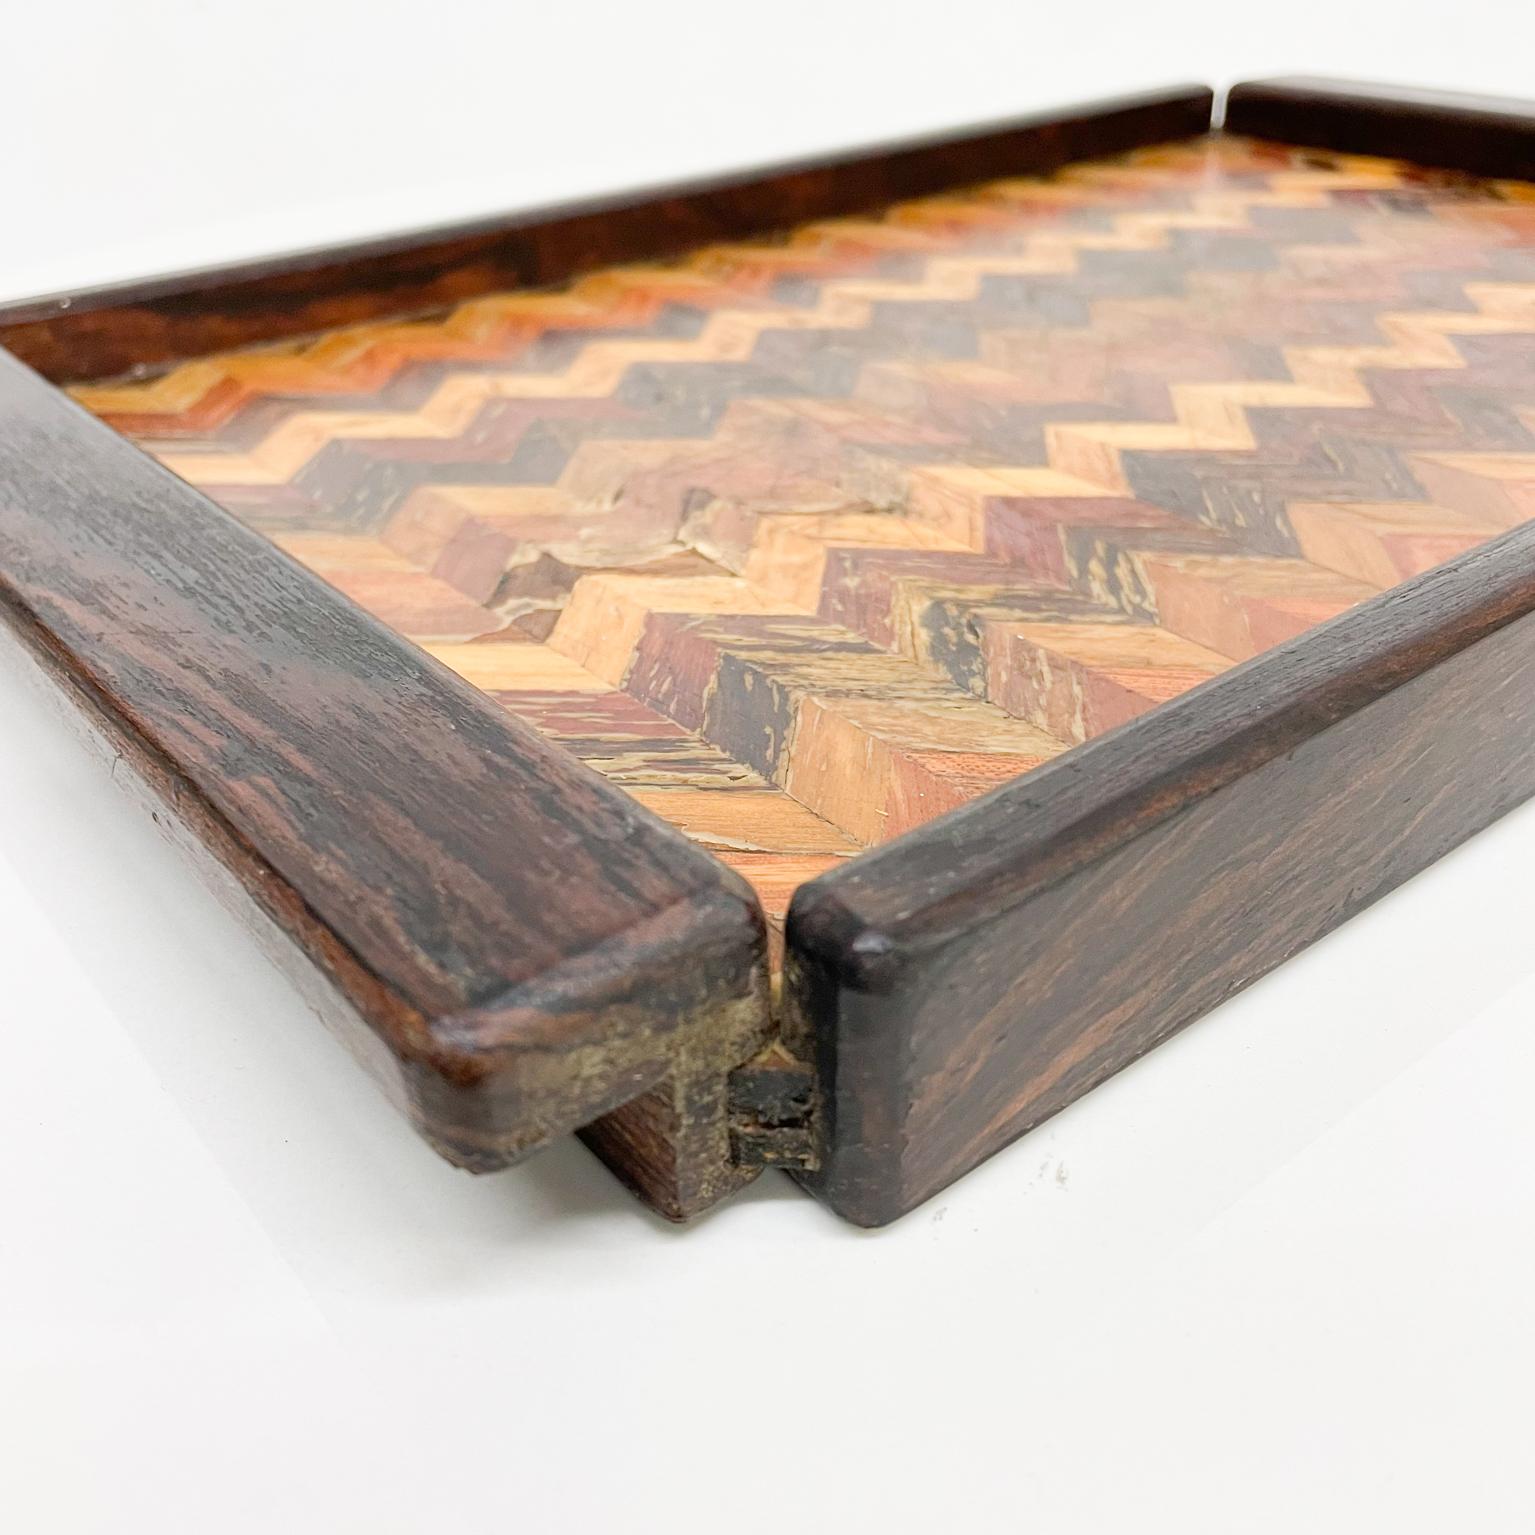 1950s Don Shoemaker Señal Serving Tray in Cocobolo Exotic Wood from Mexico 3